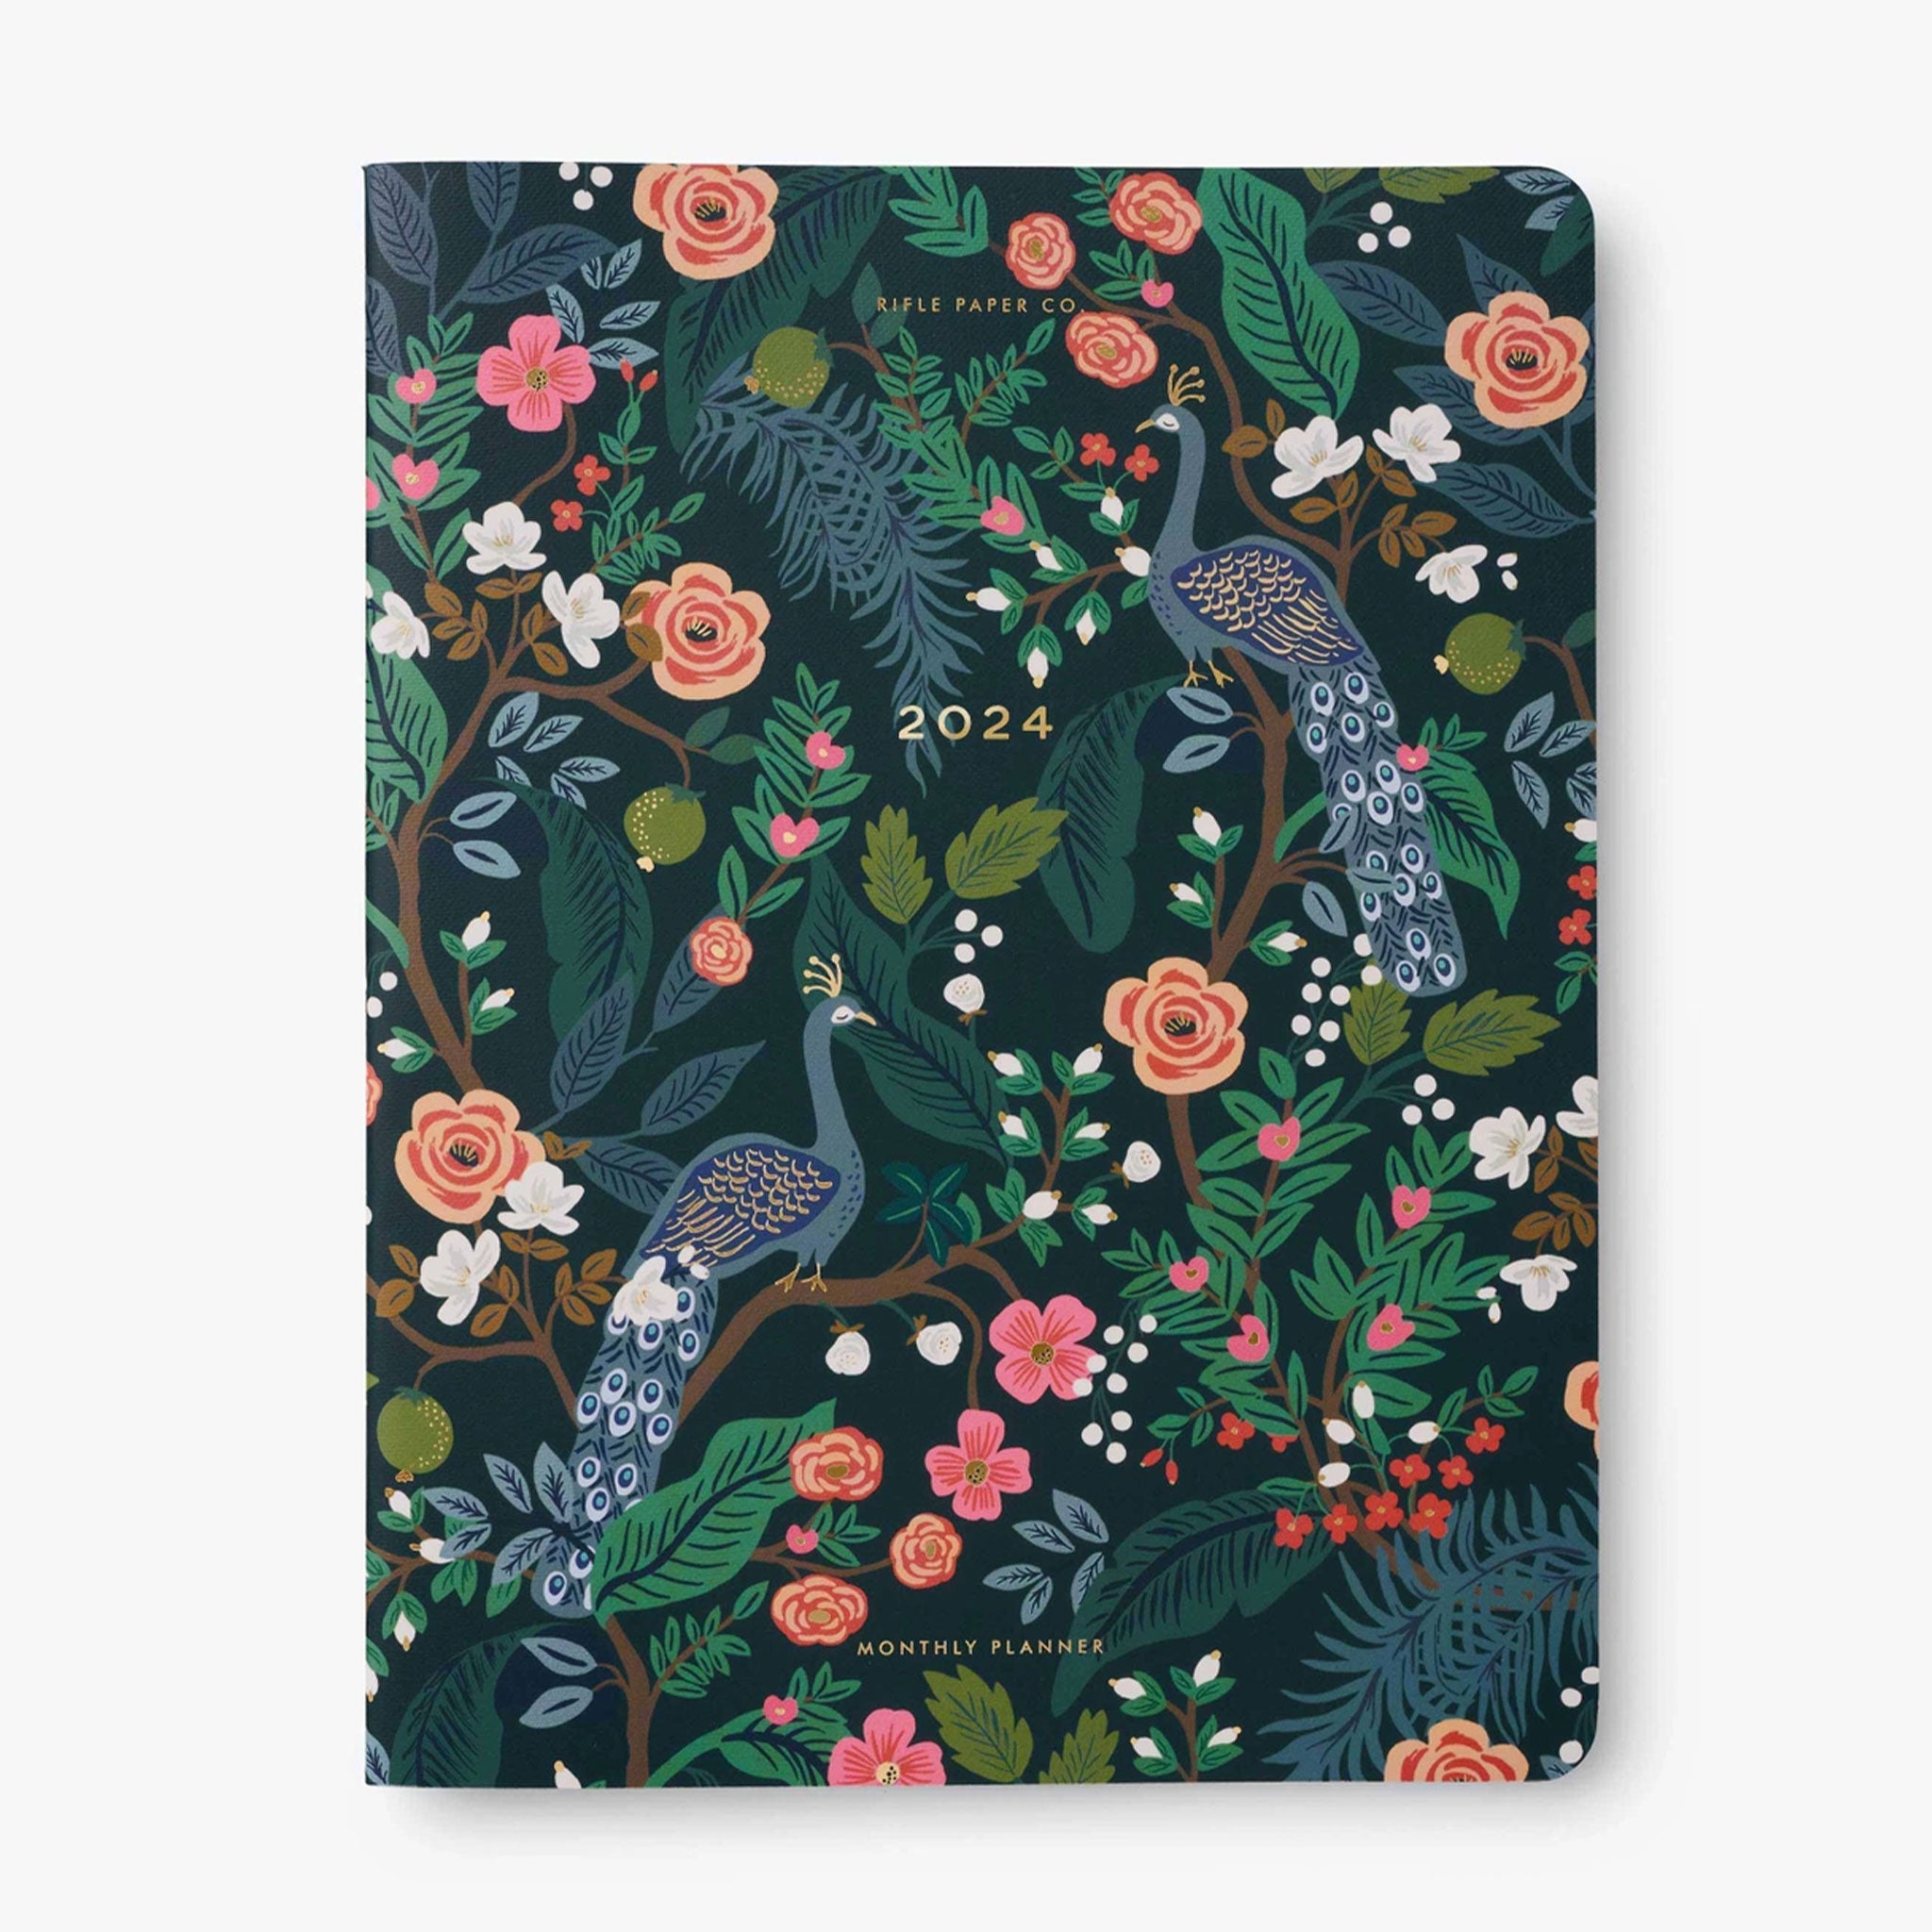 On a white background is a planner with a front cover featuring a peacock and flower design along with &quot;2024&quot; in small gold foiled text in the center. 